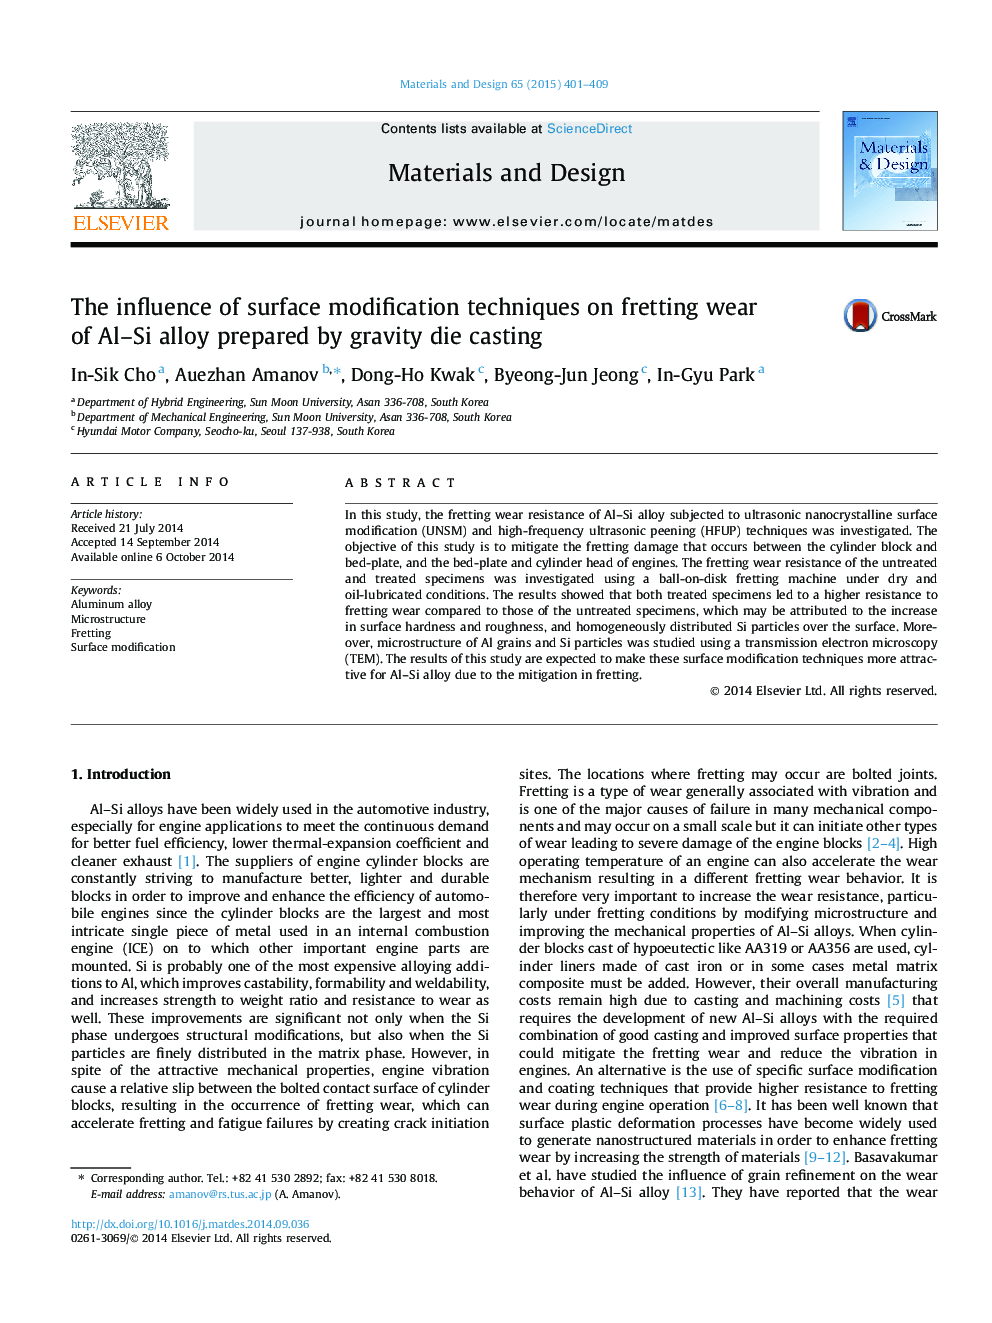 The influence of surface modification techniques on fretting wear of Al–Si alloy prepared by gravity die casting